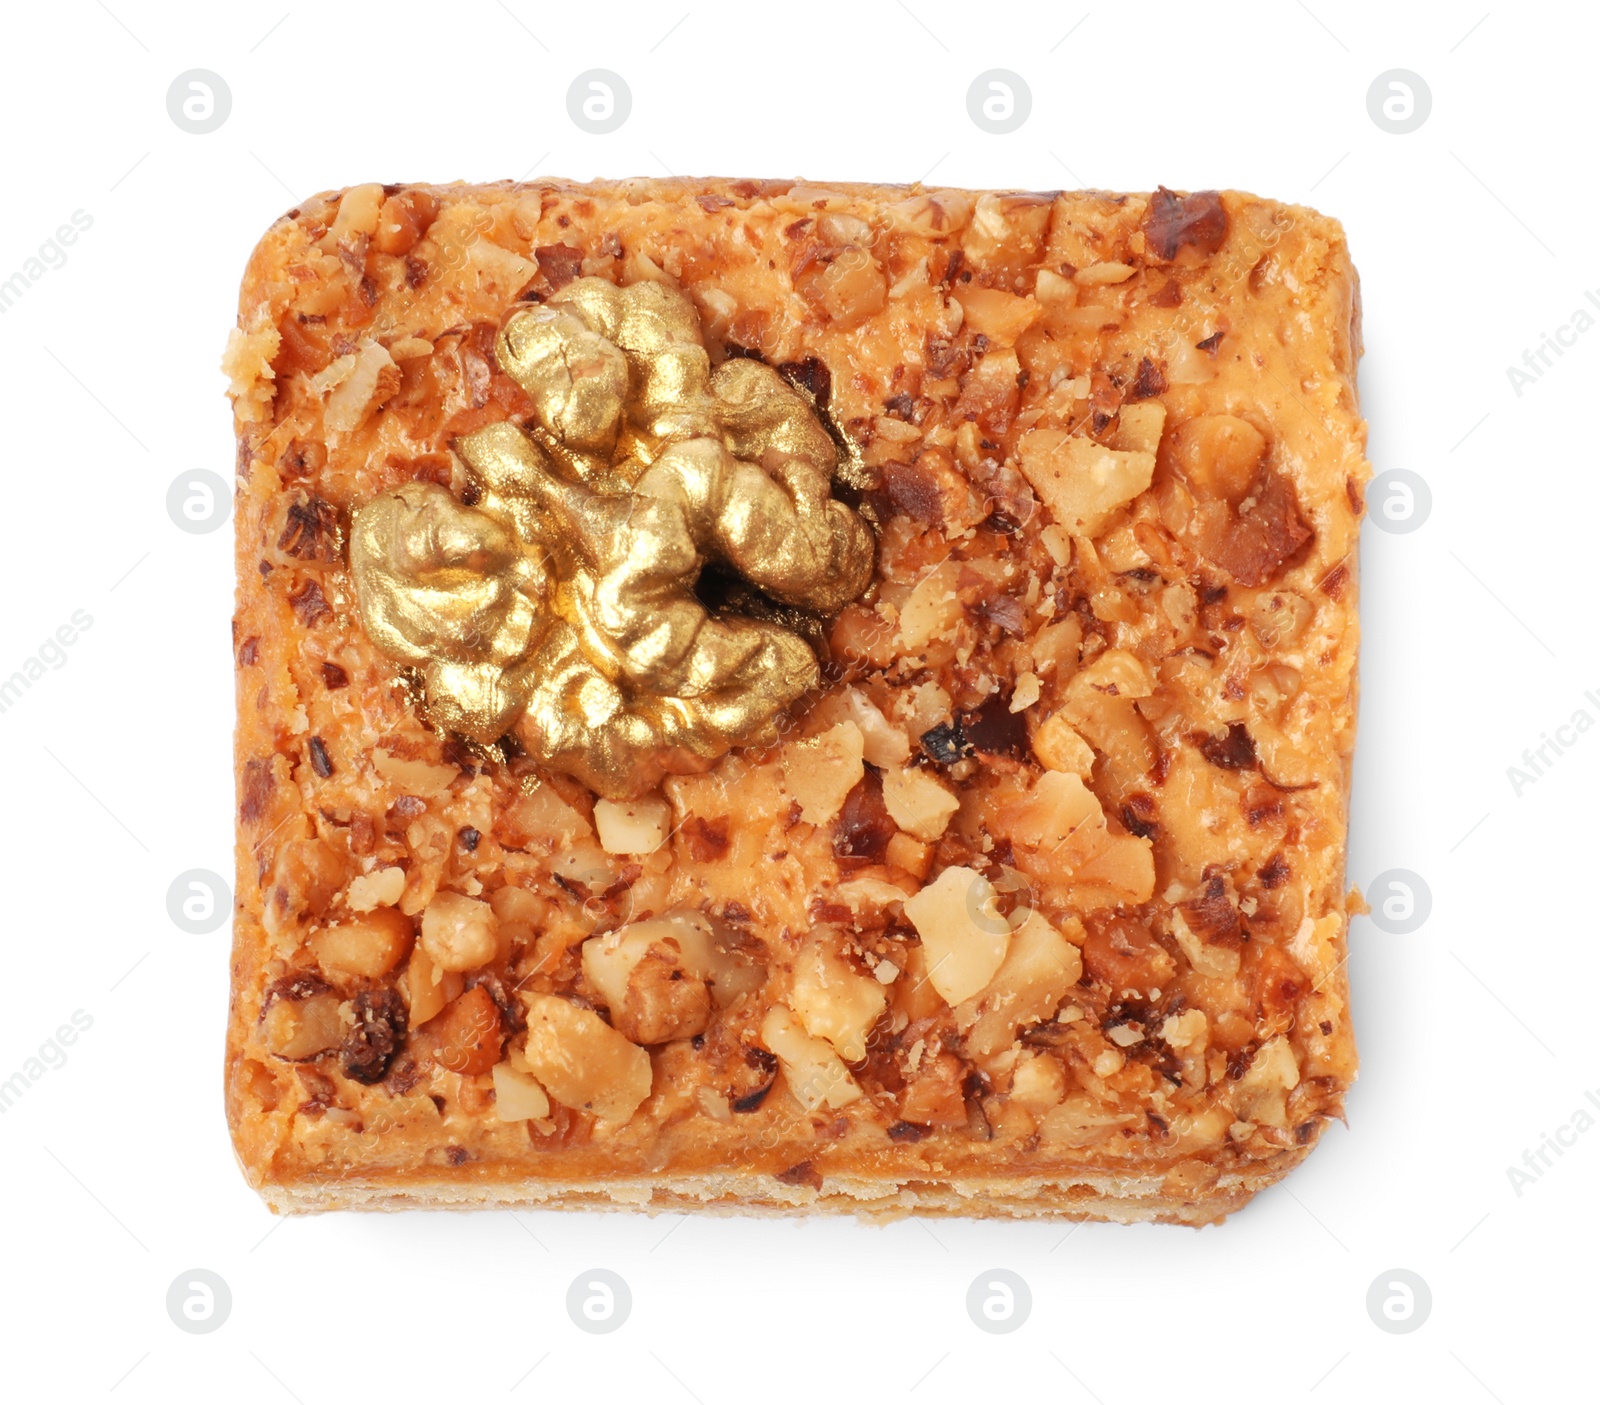 Photo of Piece of layered honey cake with walnuts on white background, top view